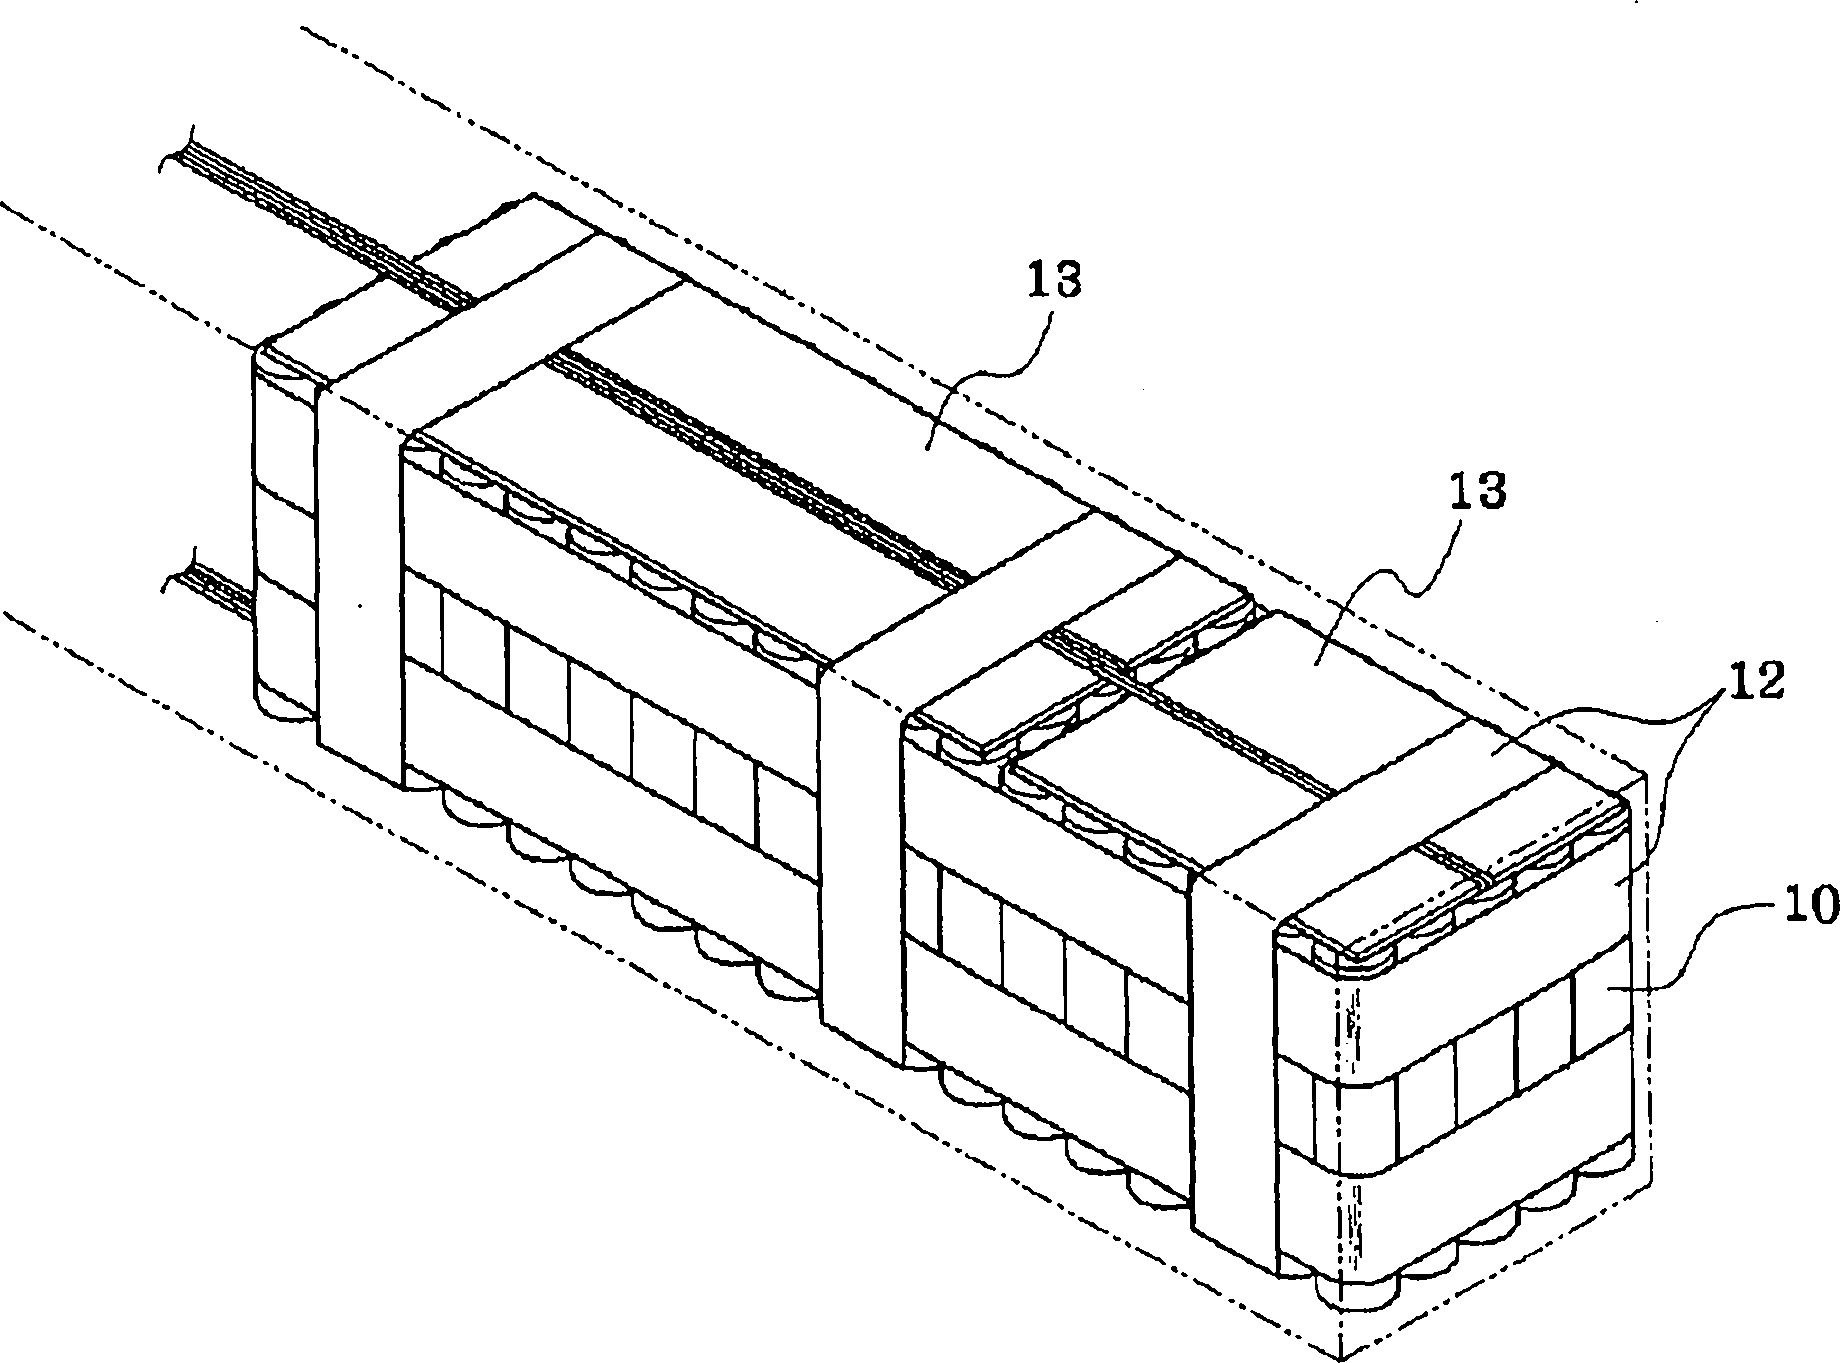 Cell cartridge with a composite intercell connecting net structure